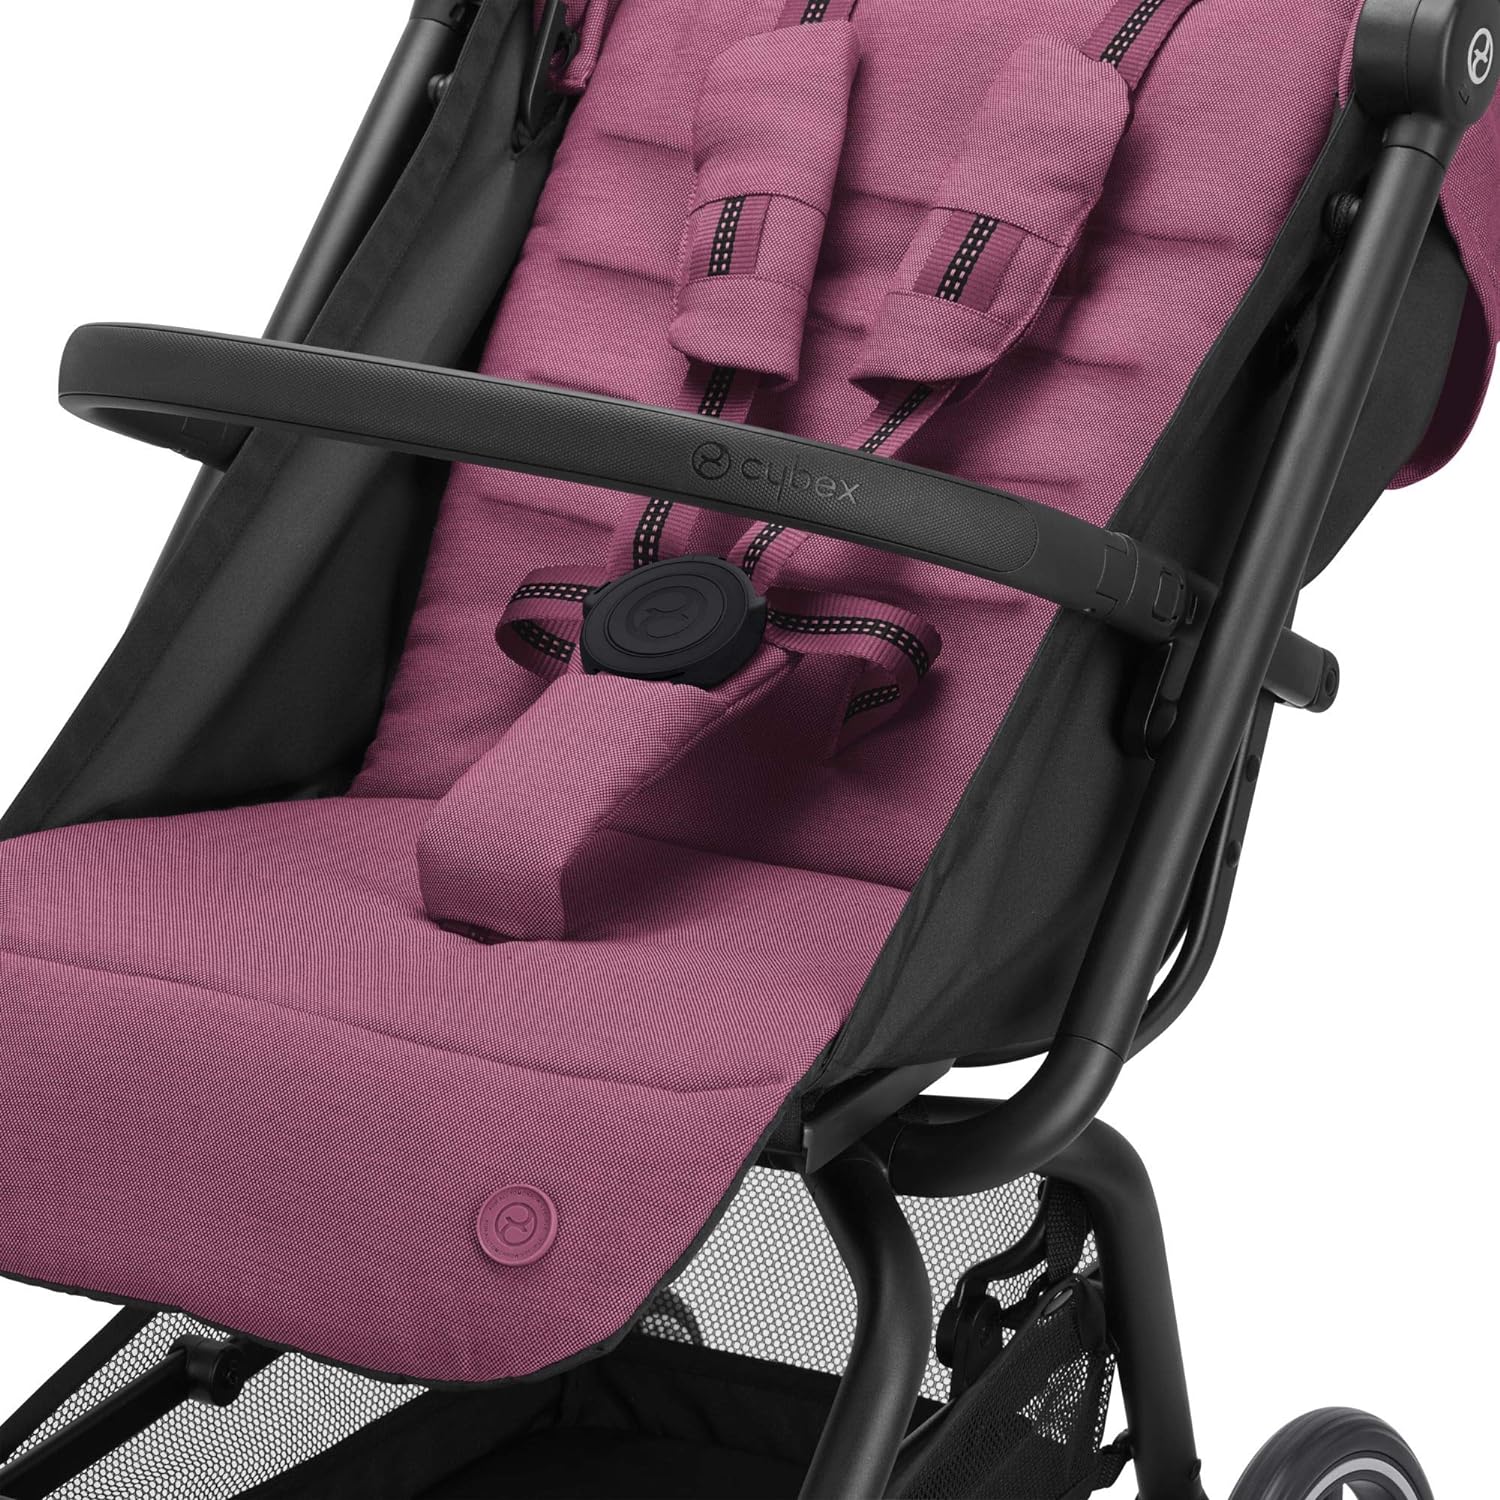 CYBEX Eezy S + 2 Stroller, Lightweight Travel Stroller, Compatible with All CYBEX Infant Car Seats, Compact Fold, Stands for Storage, All-Terrain Wheels, Baby Stroller for 6 Months+, Magnolia Pink - CYBEX Eezy S + 2 Stroller Review